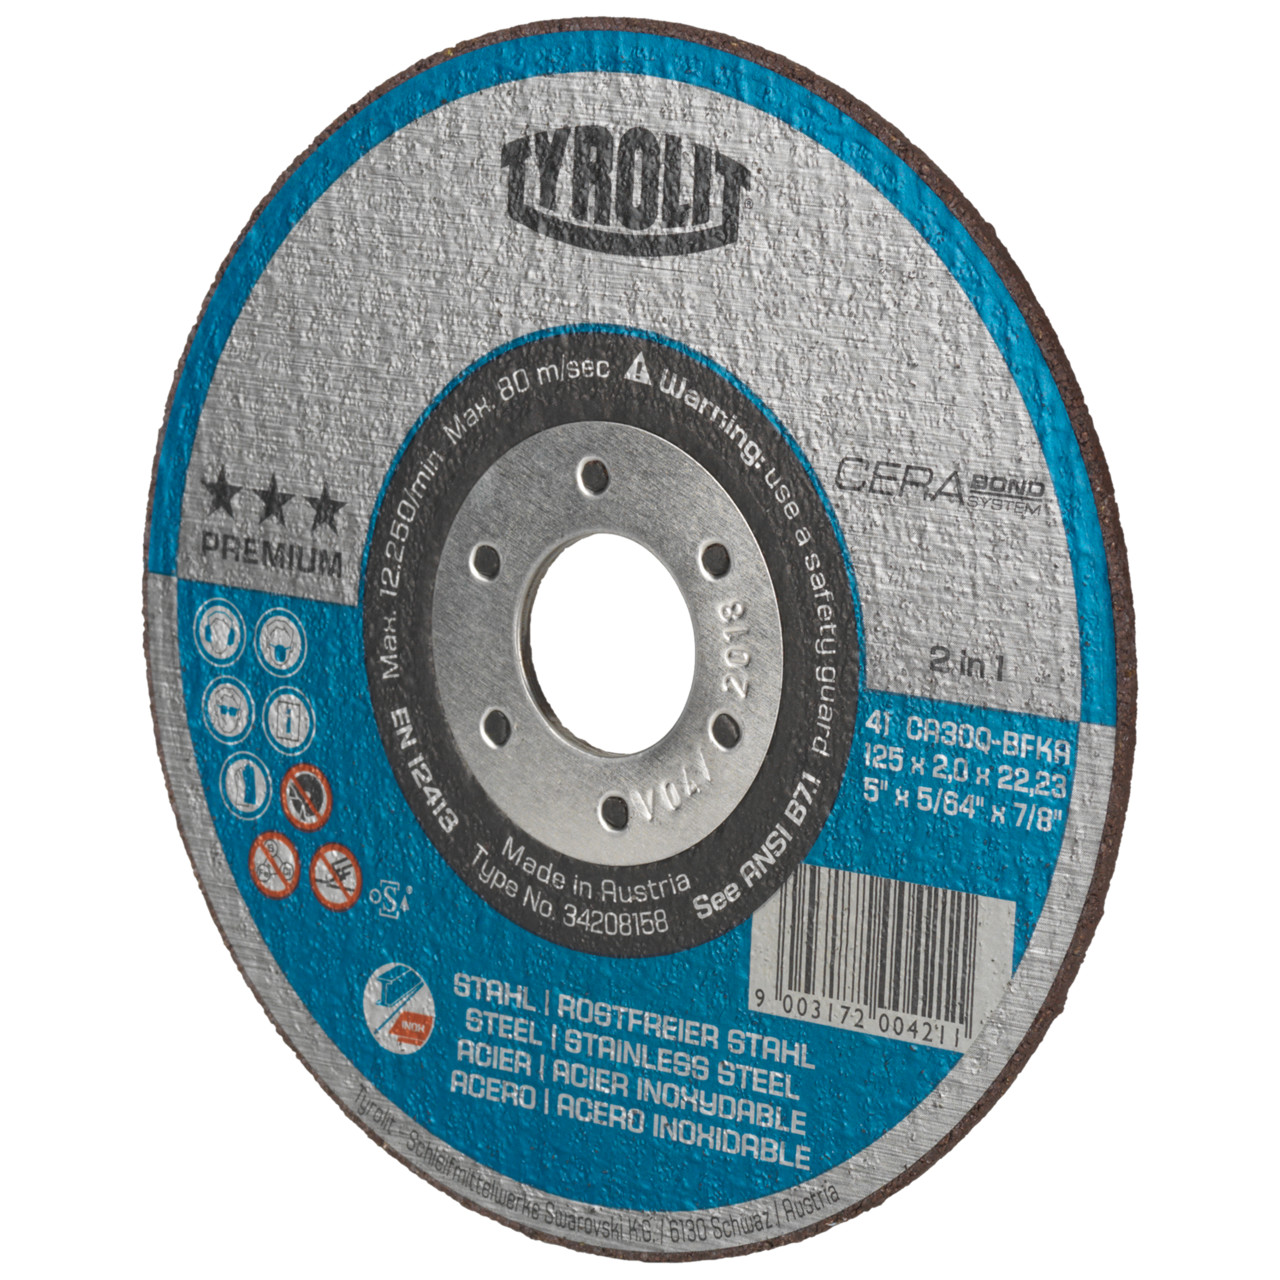 TYROLIT CERABOND Cut-off wheel DxDxH 125x1.3x22.23 2in1 for steel and stainless steel, shape: 41 - straight version, Art. 34597628 (old Art. 34256273)